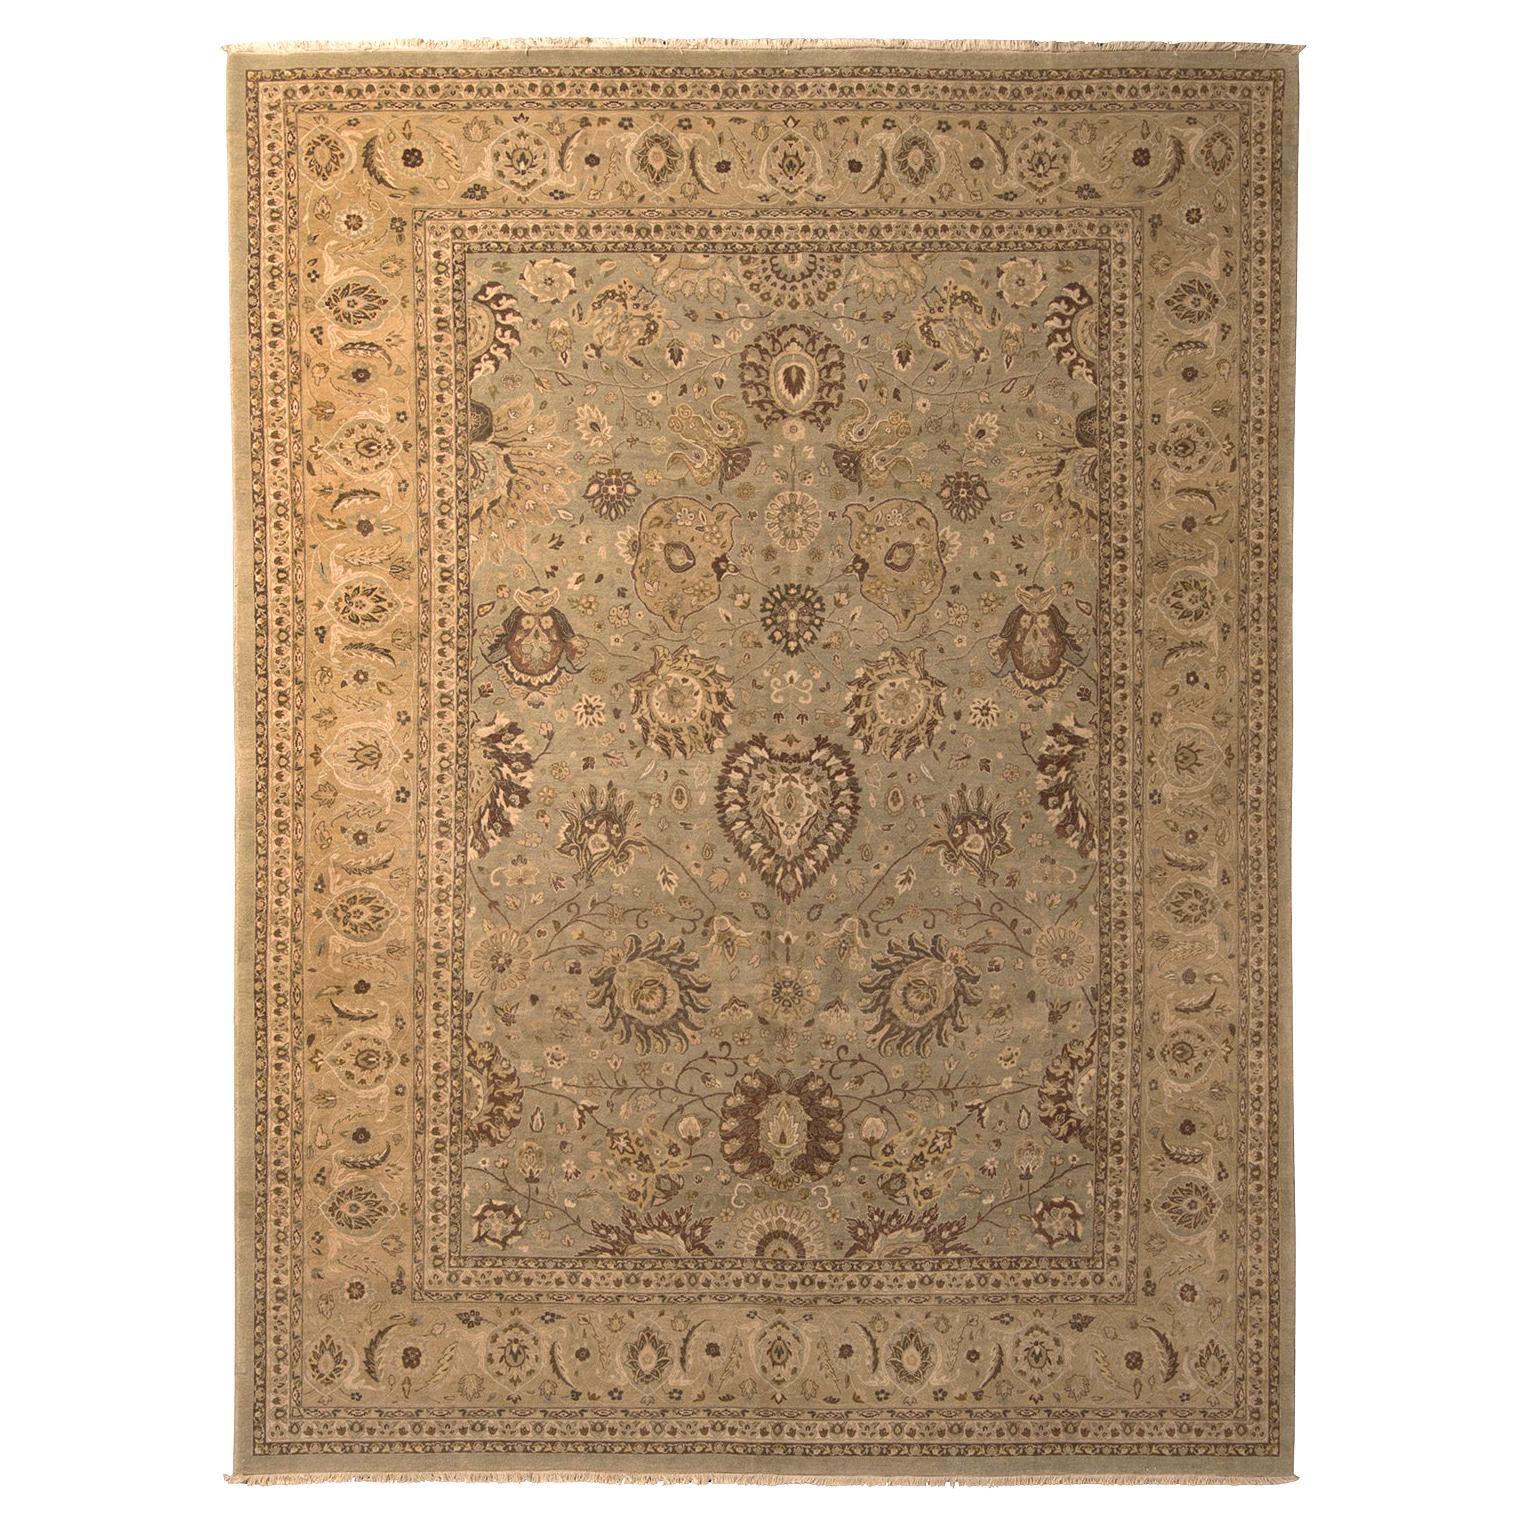 Rug & Kilim's Classic Persian Style Rug, Blue Field, Beige-Brown Floral Pattern For Sale